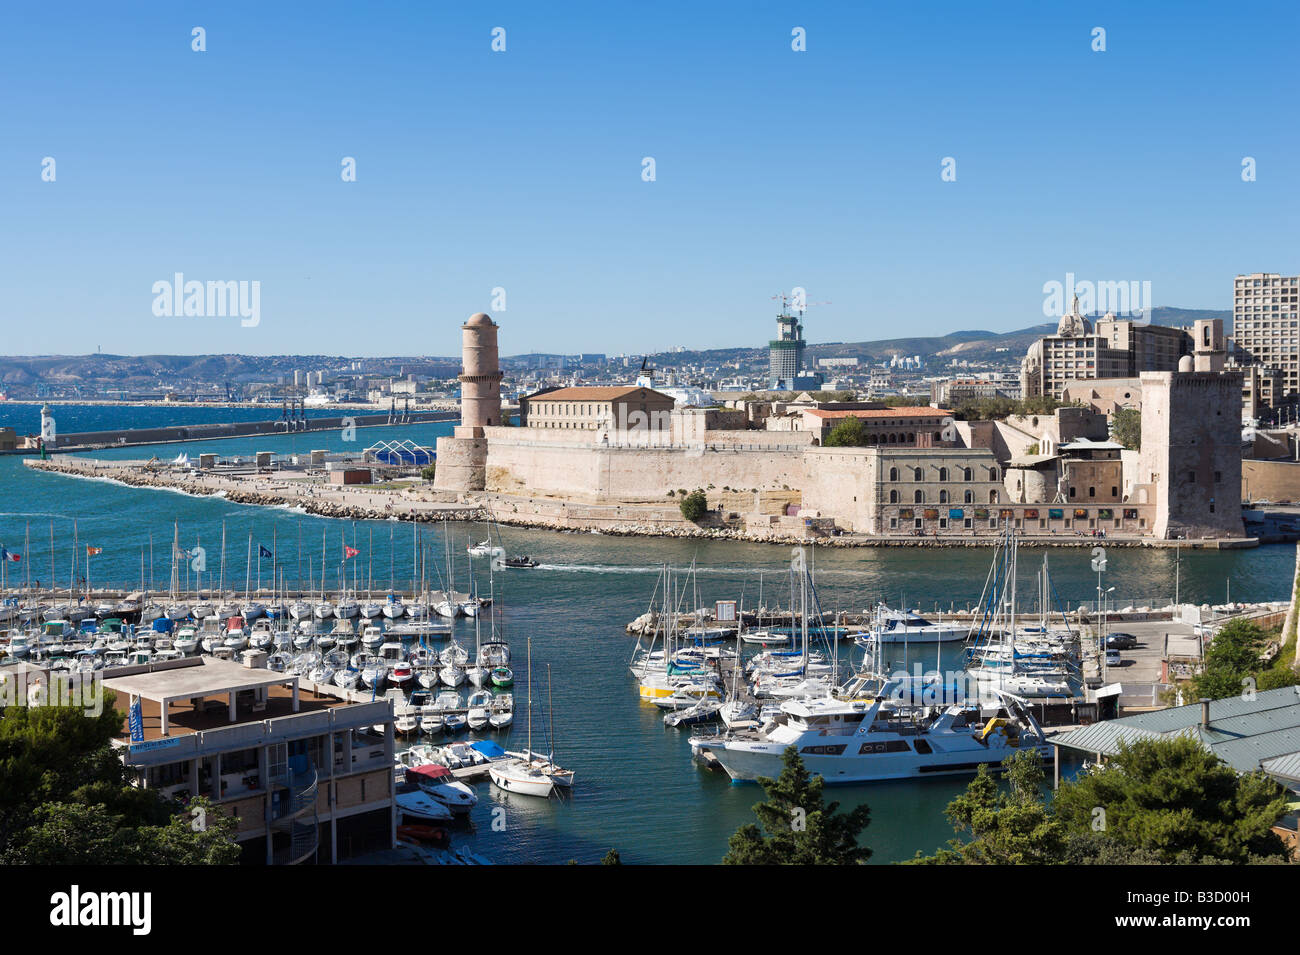 View of Fort St Jean from Fort St Nicolas, the Vieux Port, Marseille, Cote d'Azur, France Stock Photo